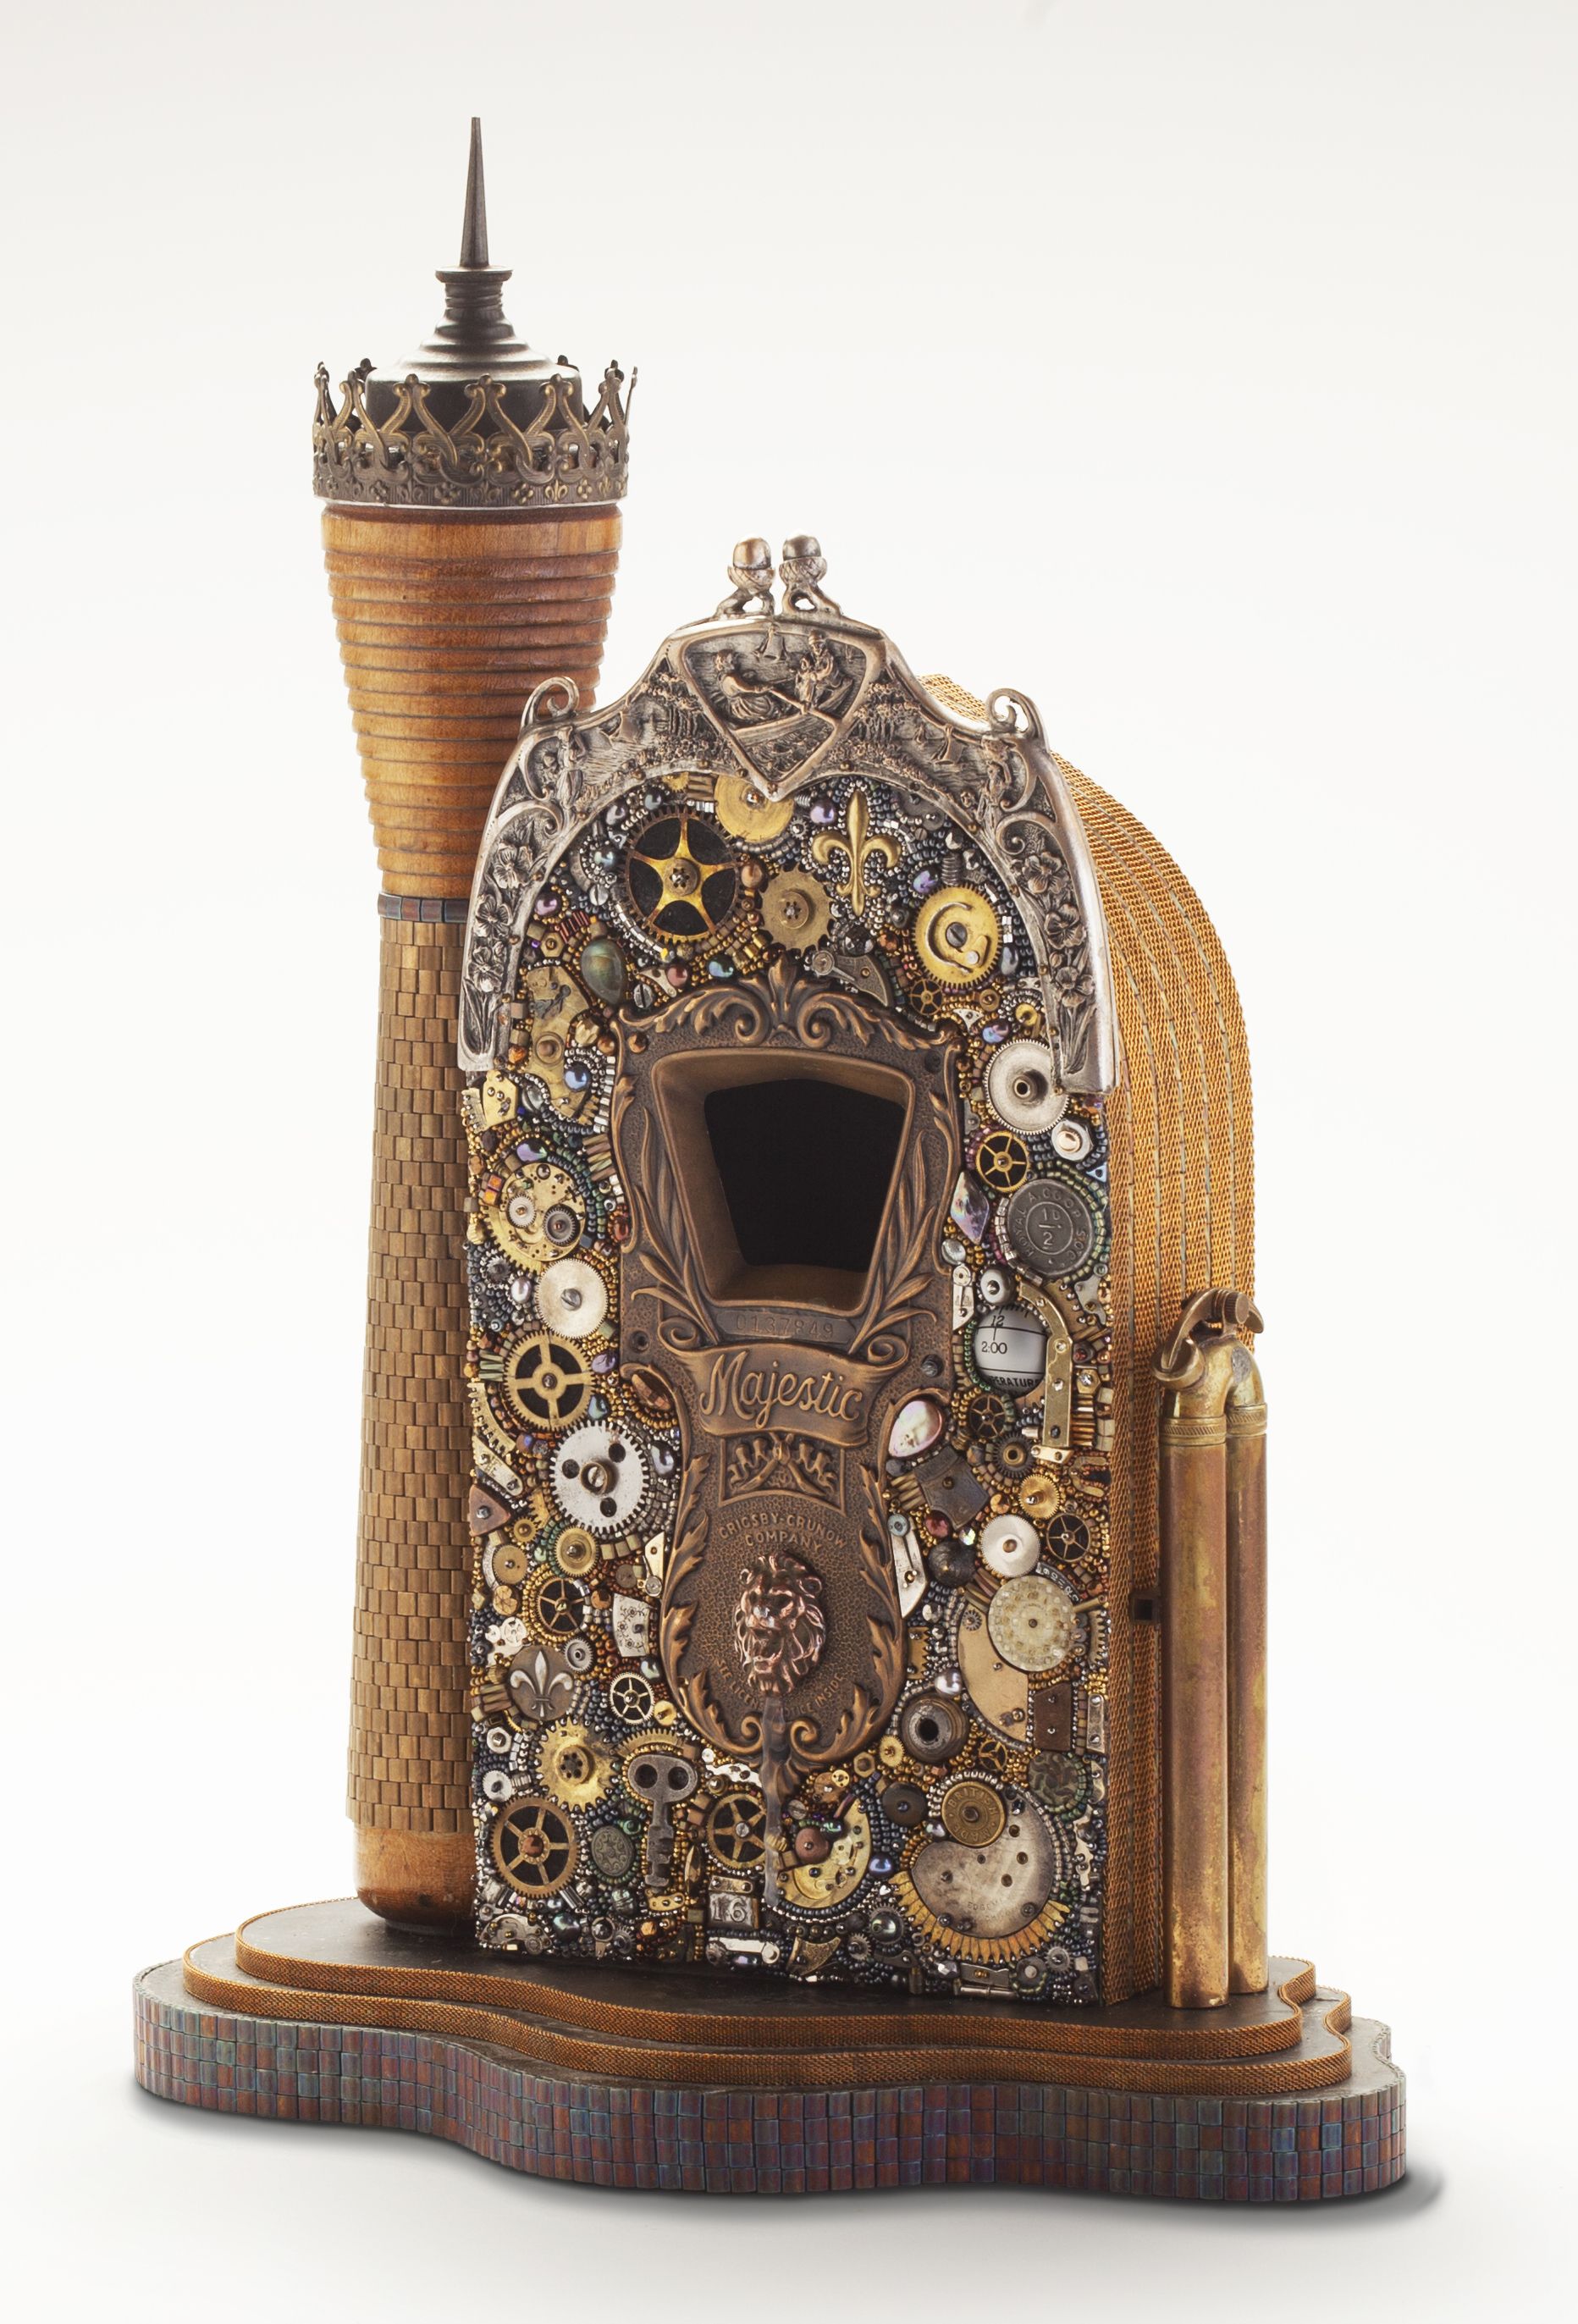 Magestic Castle Birdhouse Created from found antique objects ...